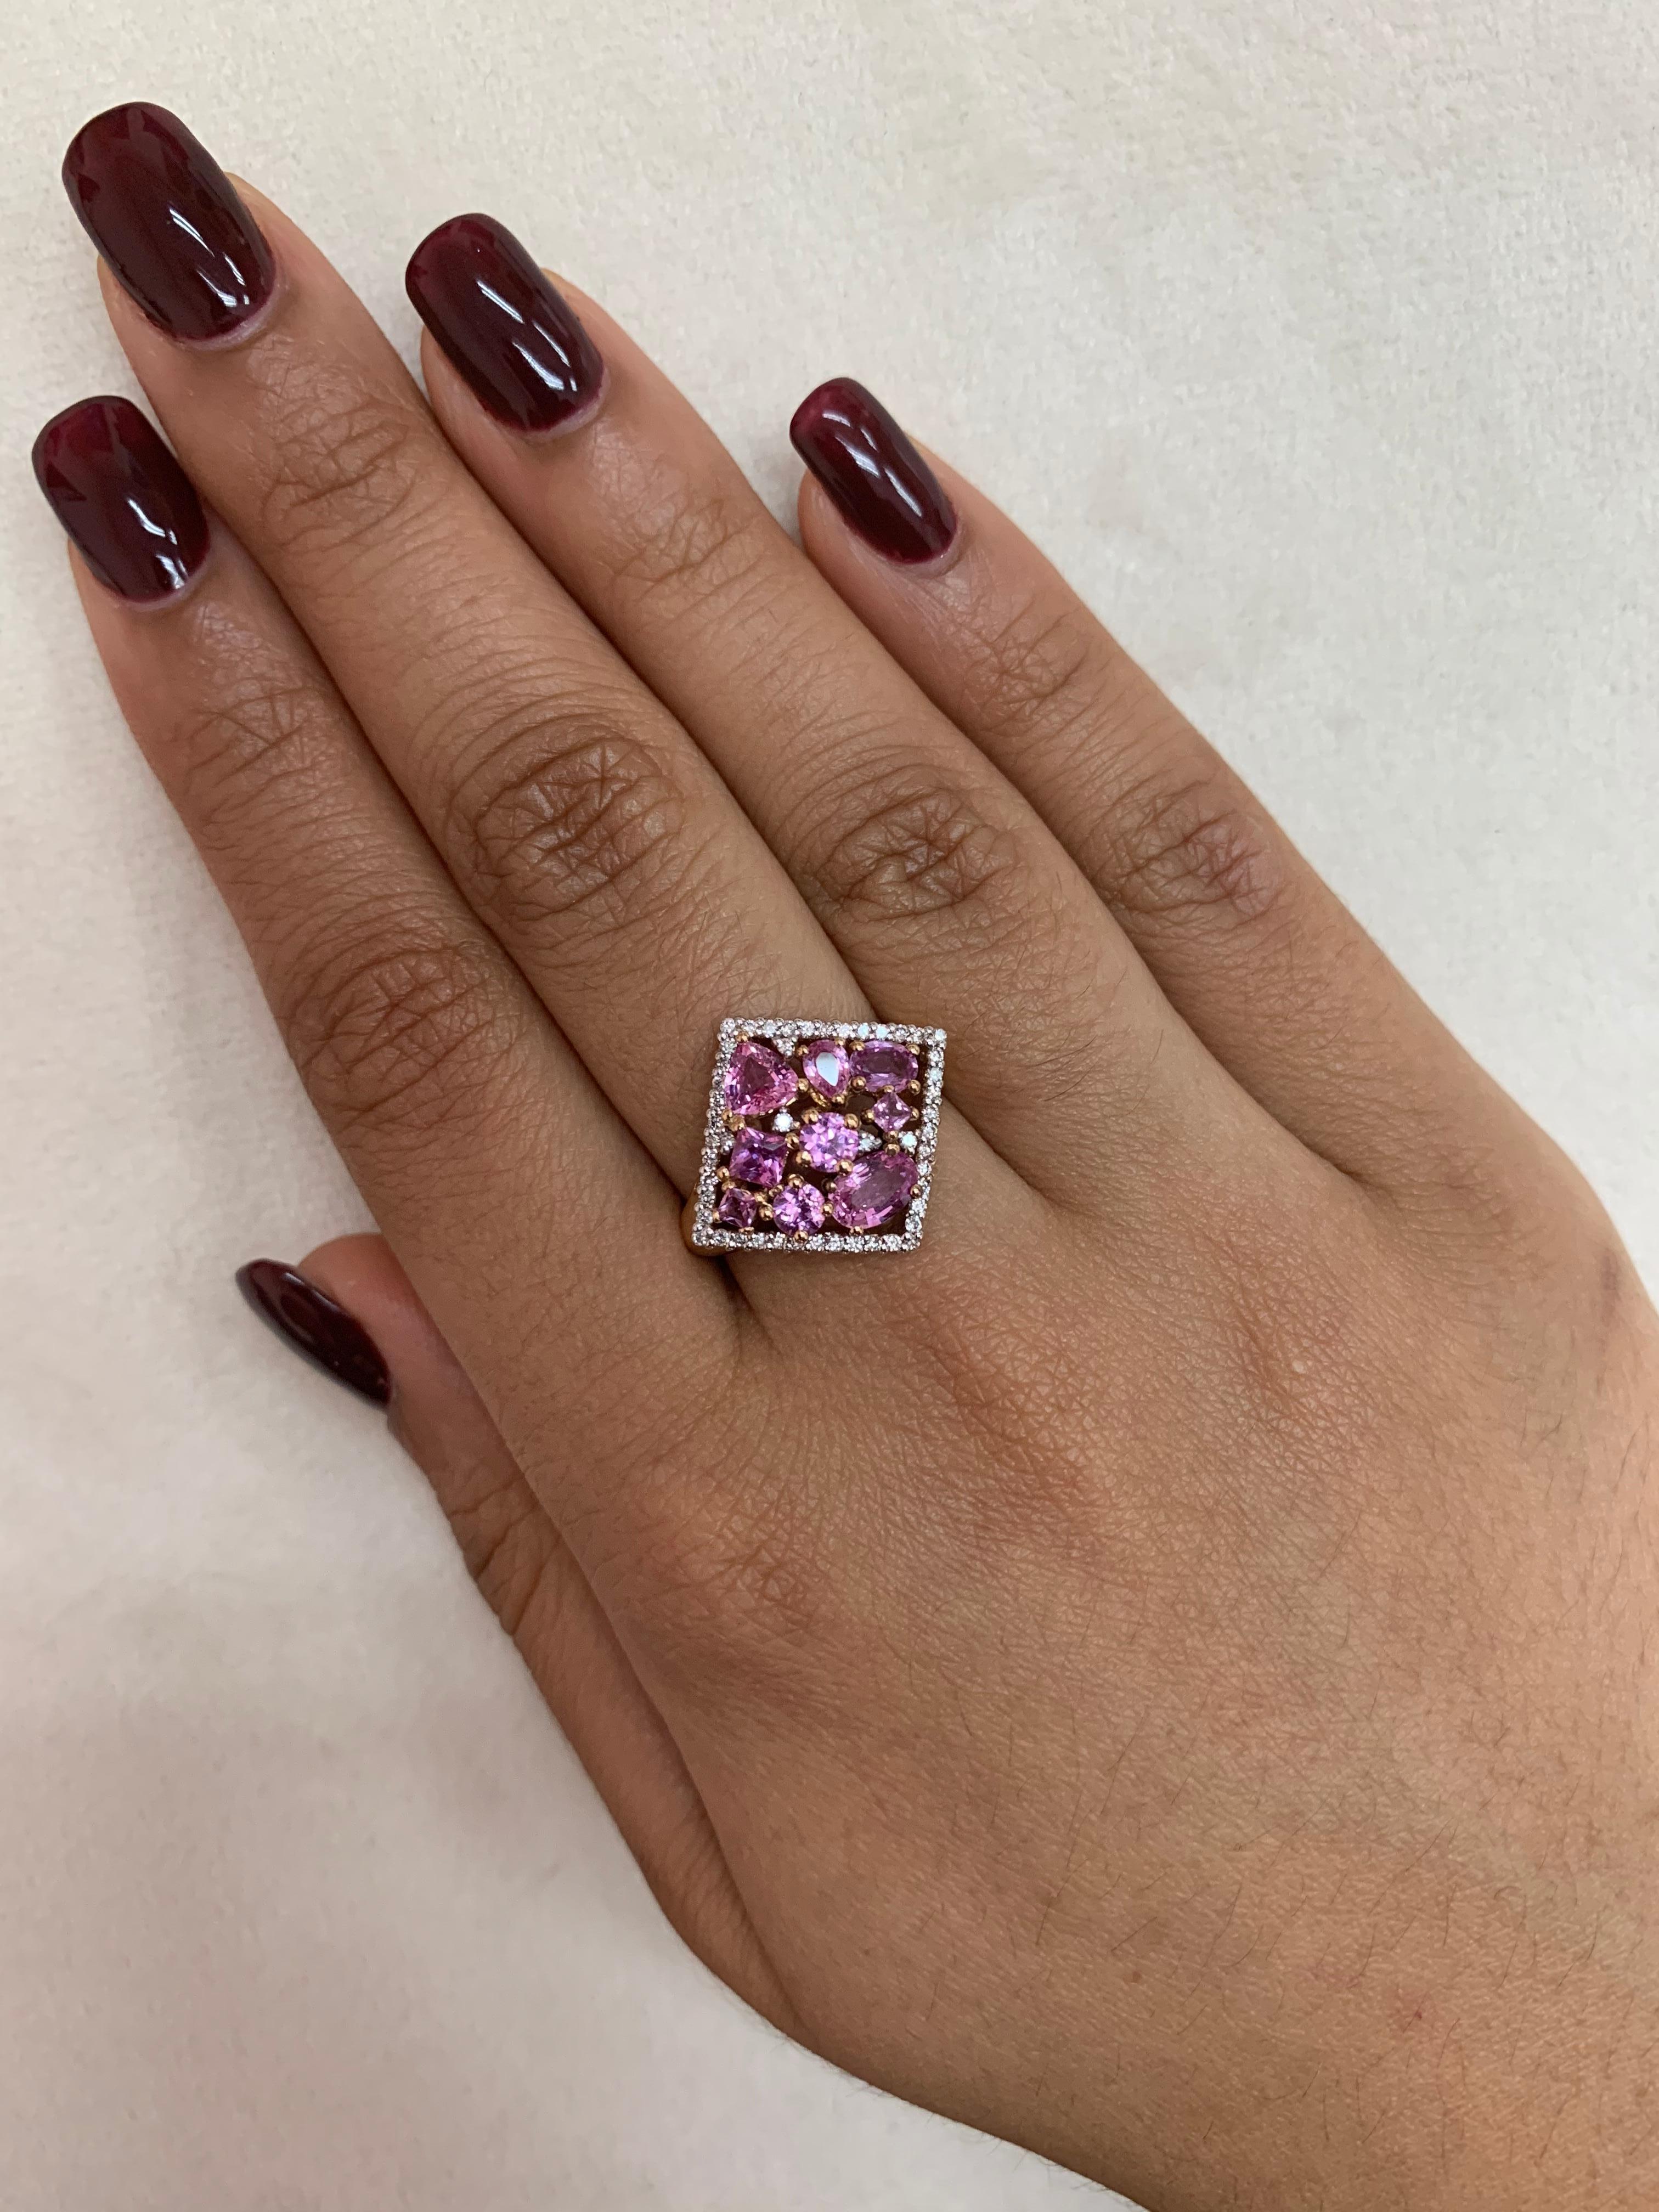 Sunita Nahata presents an exclusive collection of pink sapphire rings. With a mix of floral designs and cluster setting these pieces are accented with diamonds to present a unique array of rings. 

Designer pink sapphire ring in 18K rose gold with